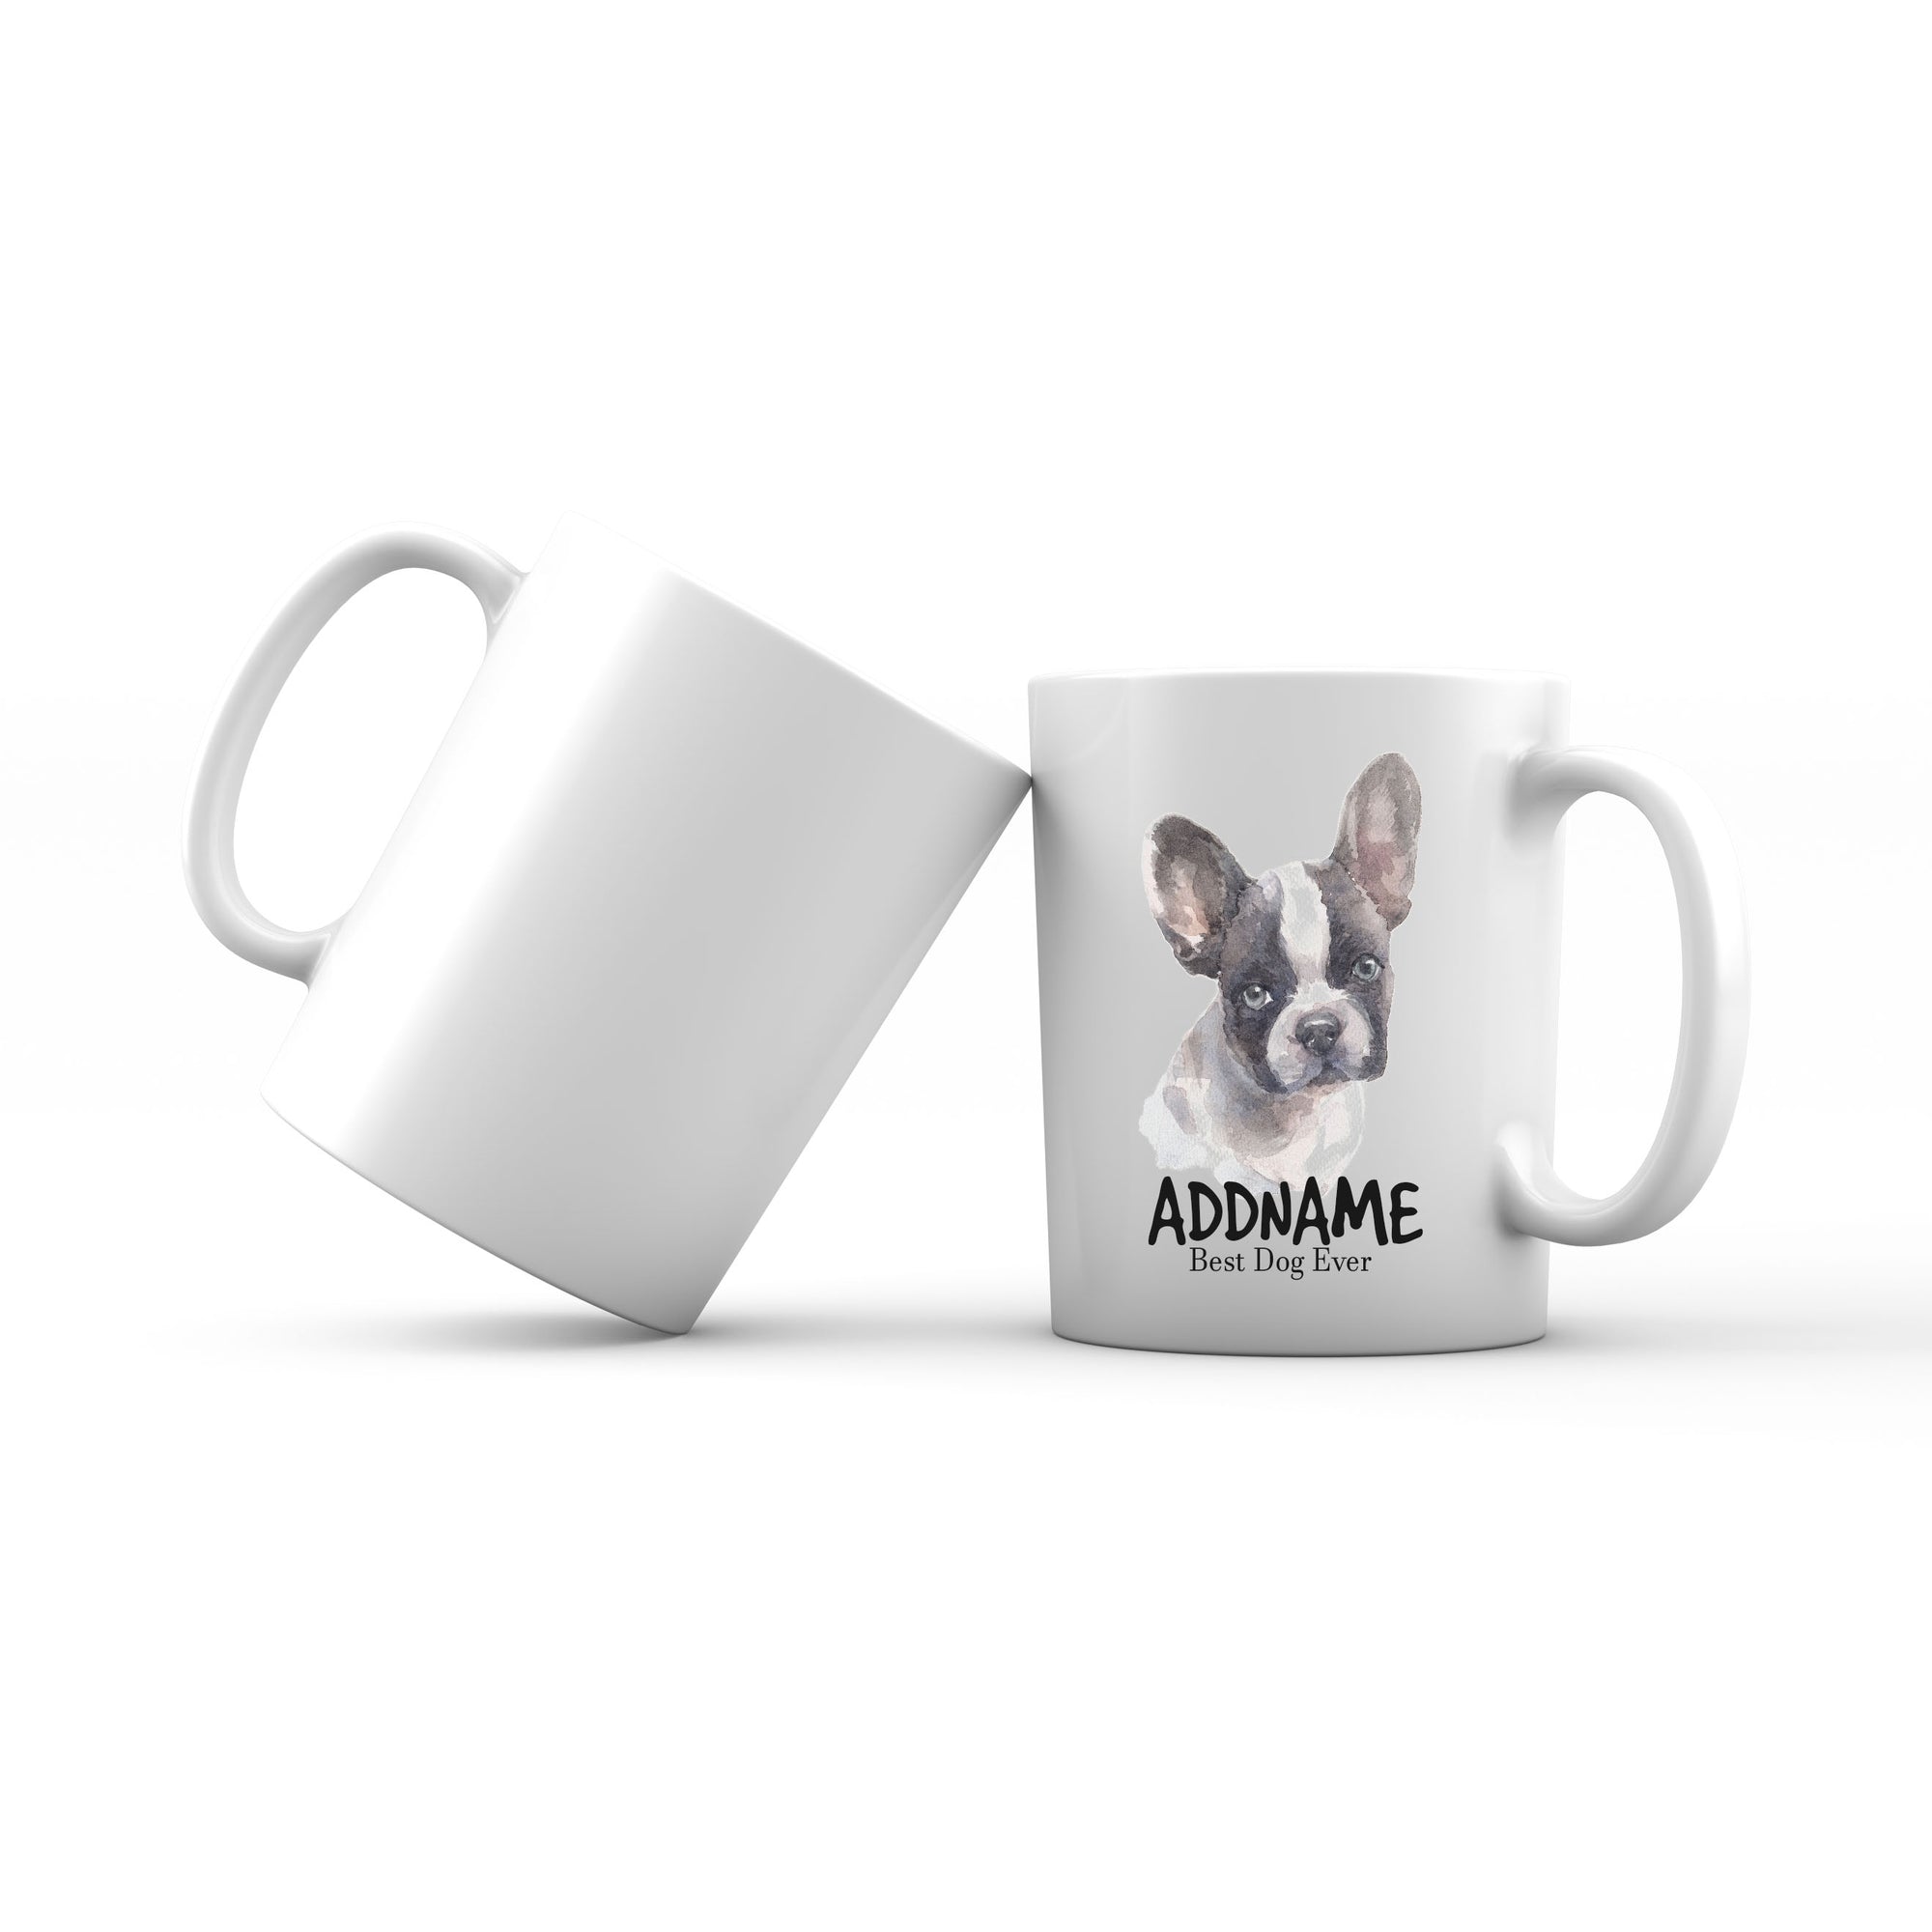 Watercolor Dog French Bulldog Frown Best Dog Ever Addname Mug